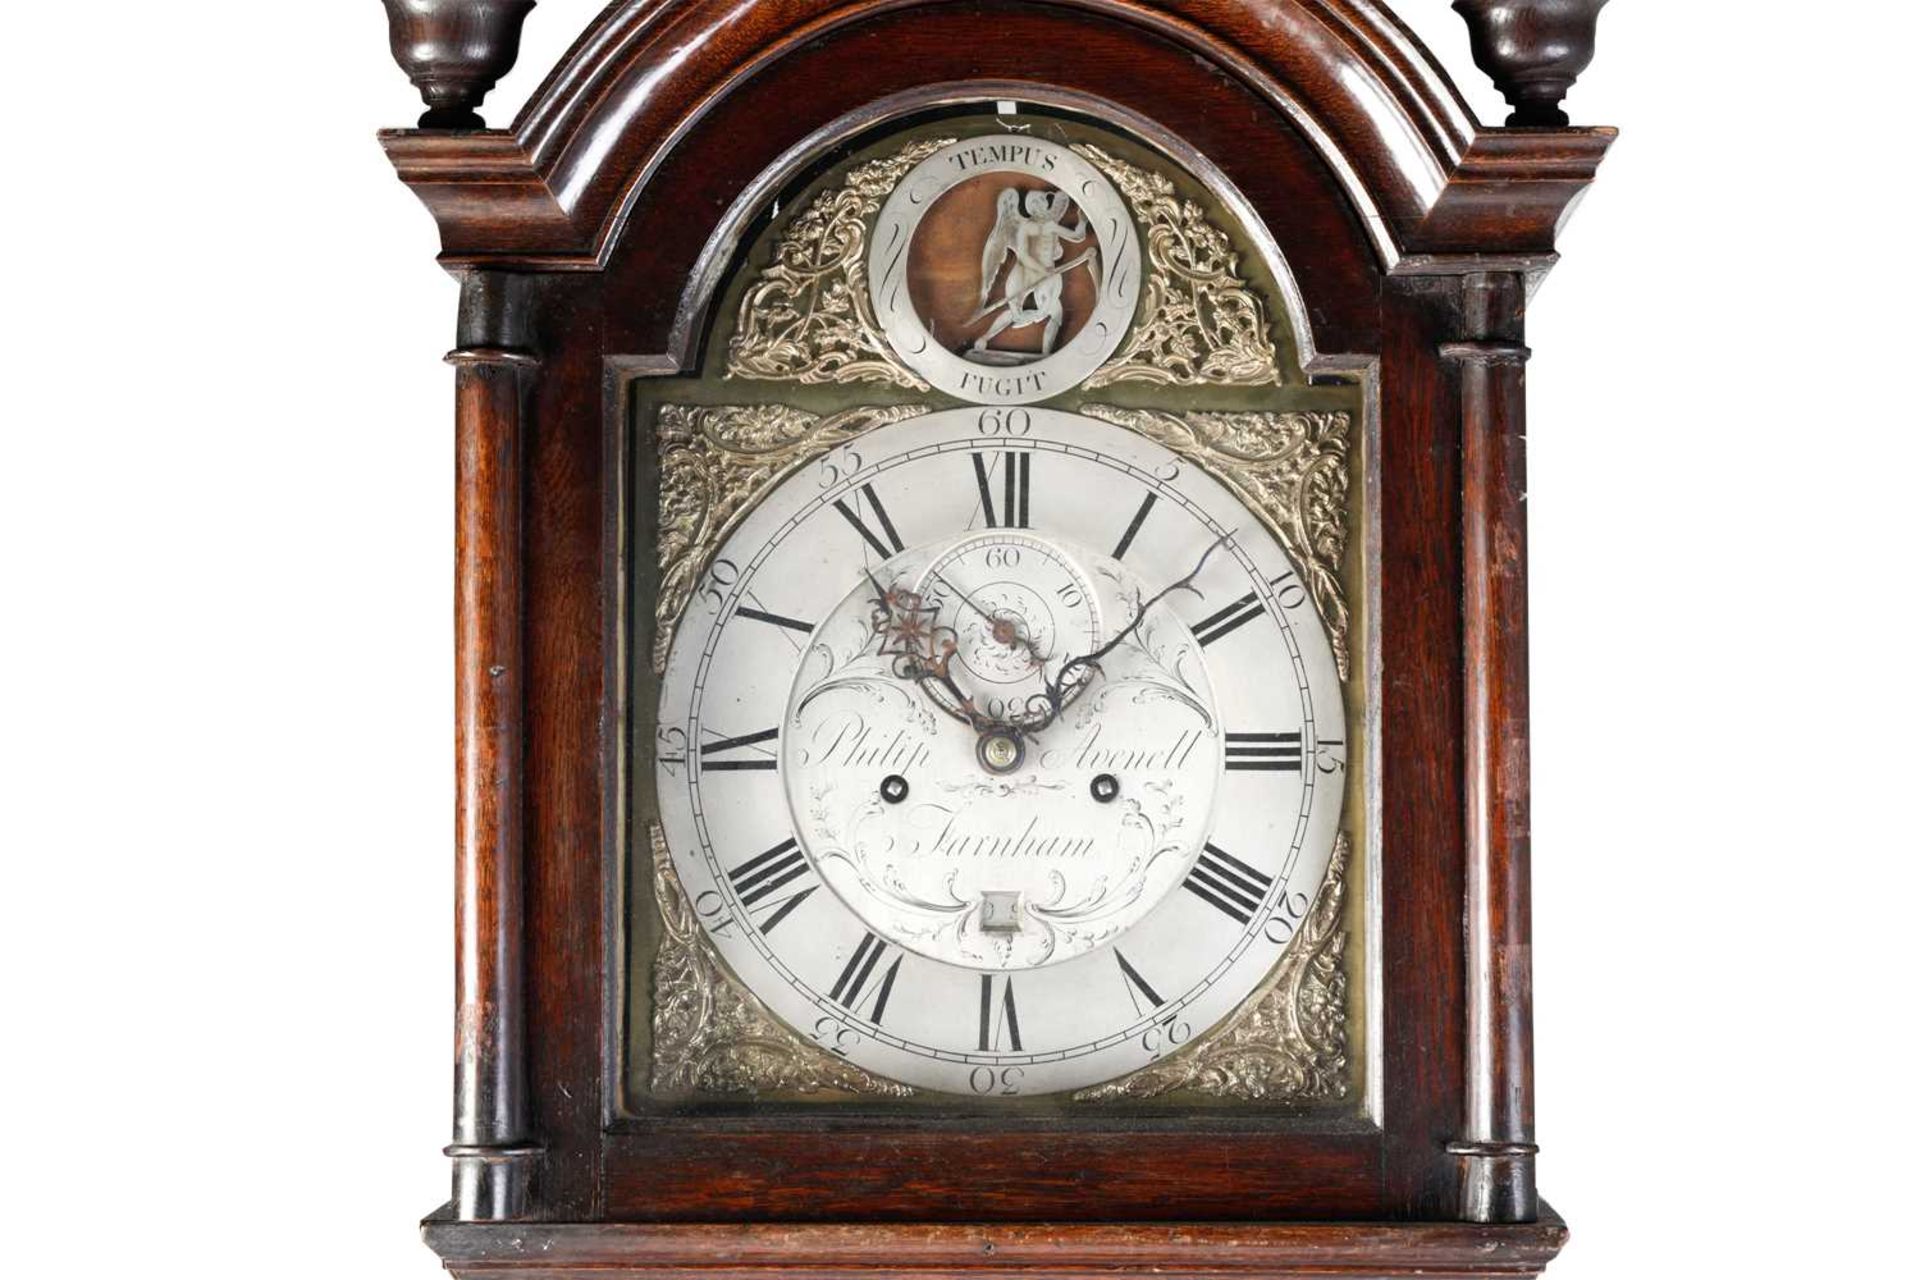 Philip Avenalll (II) of Farnham (Surrey); A George III oak-cased 8-day longcase clock, fitted with a - Image 19 of 19